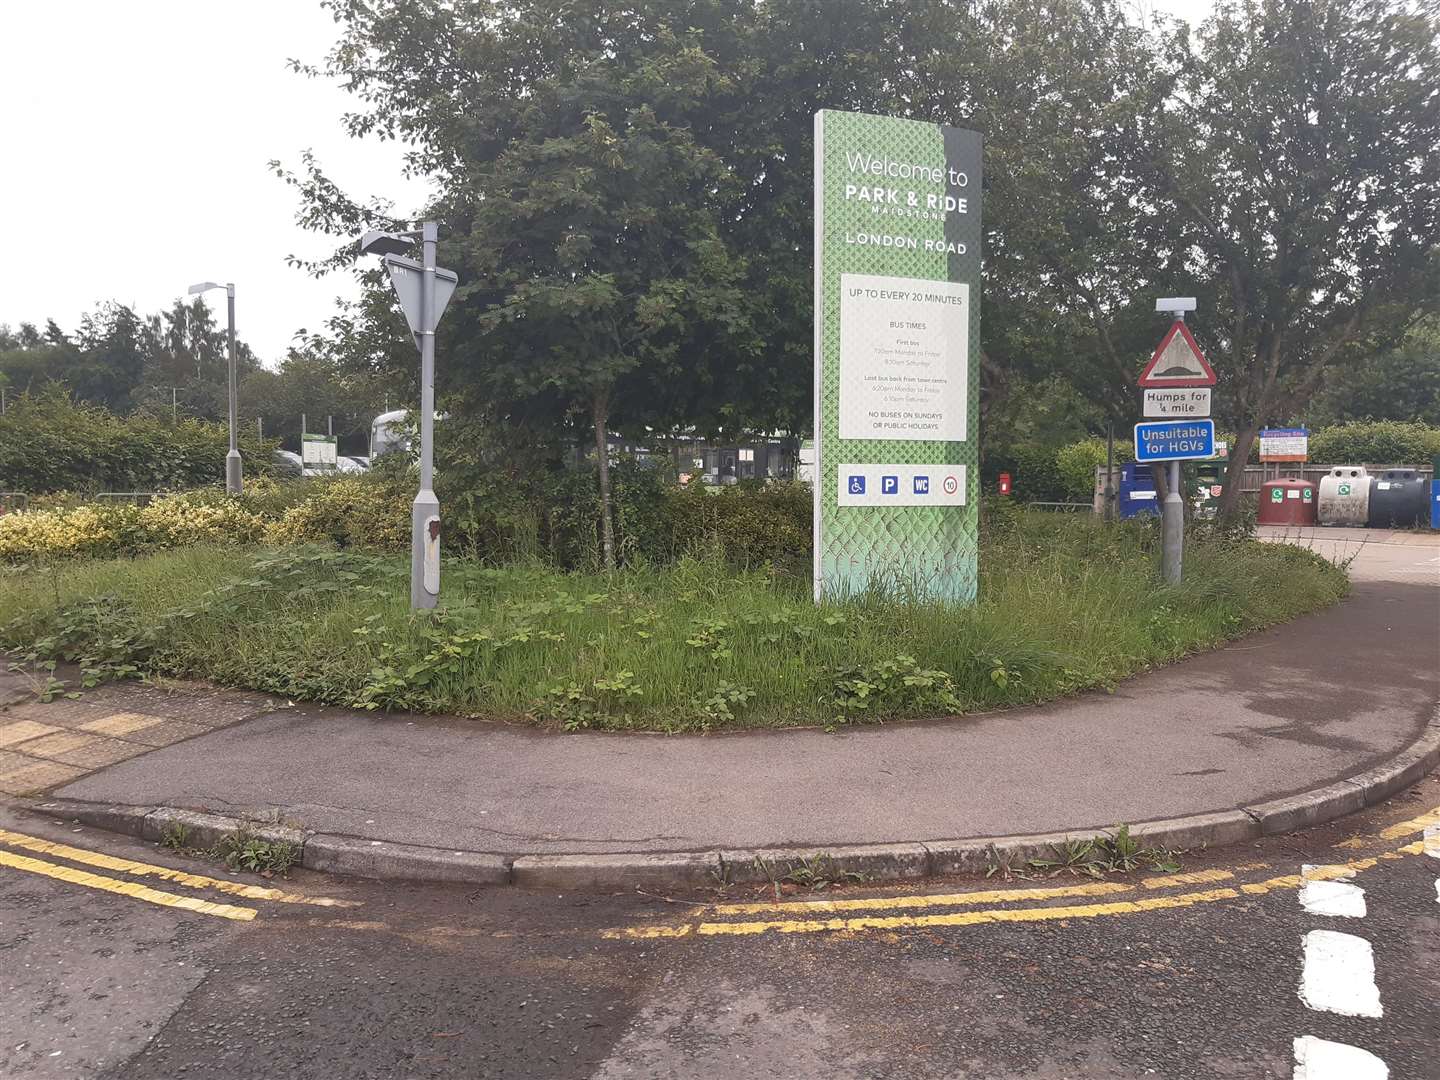 The London Road Park and Ride site off Beaver Road in Allington